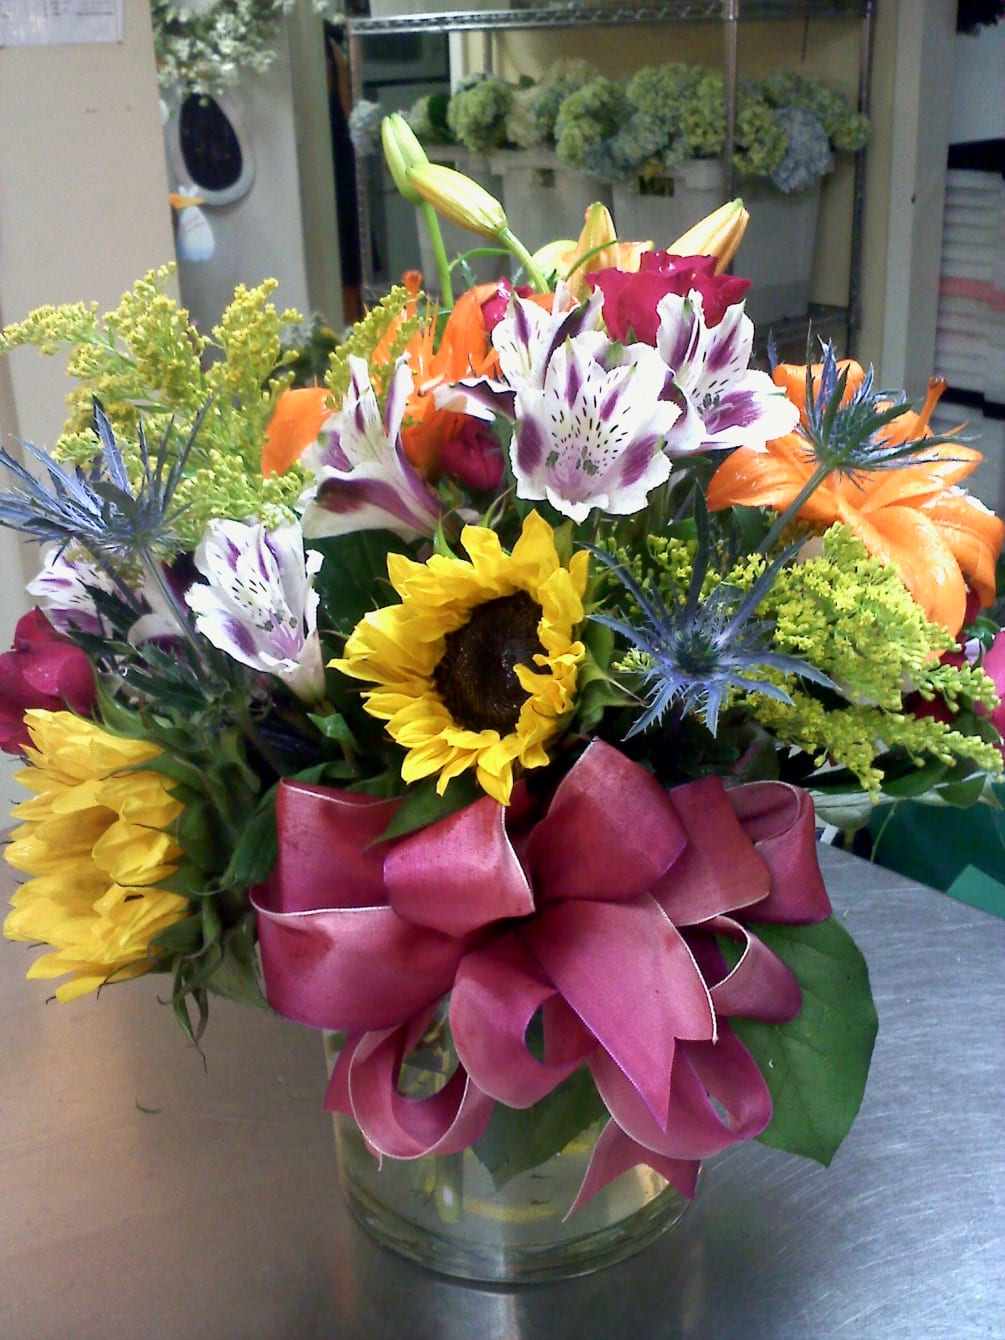 colorful mixture with sunflowers, orange lilies, and summer fillers made in a